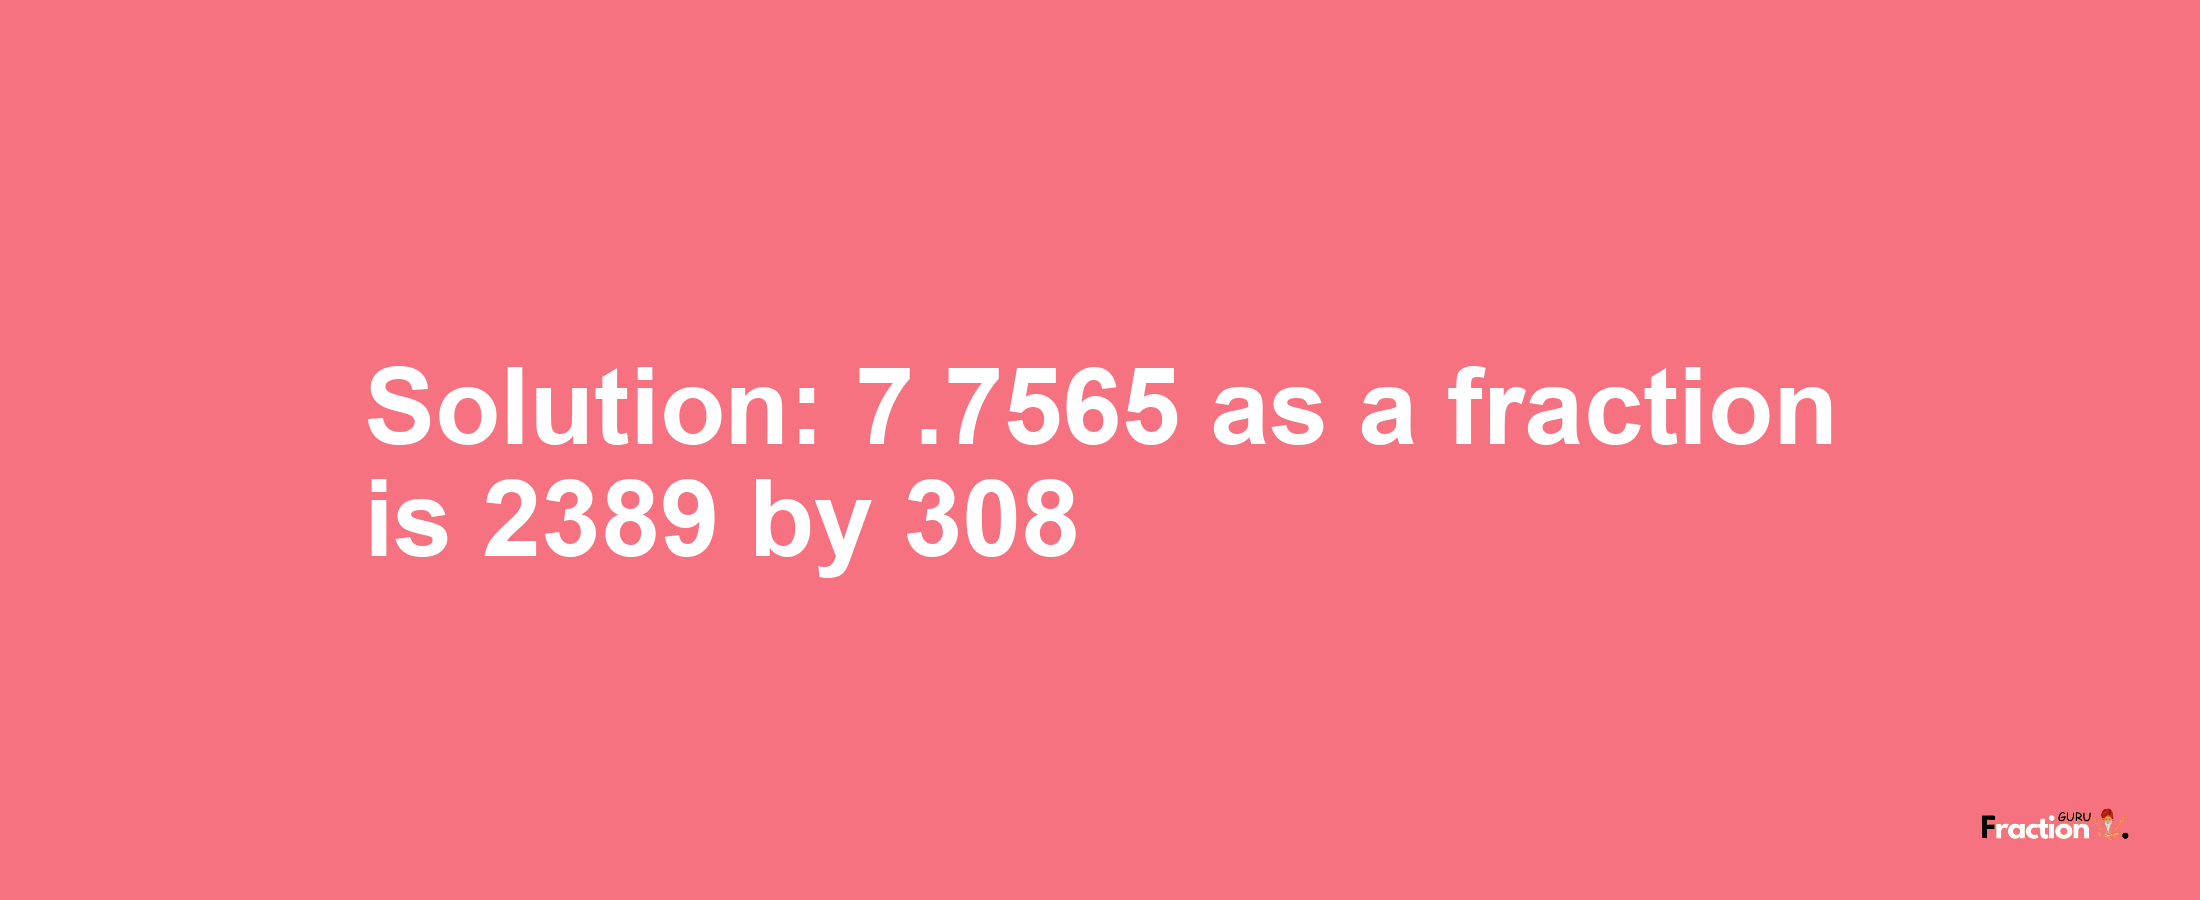 Solution:7.7565 as a fraction is 2389/308